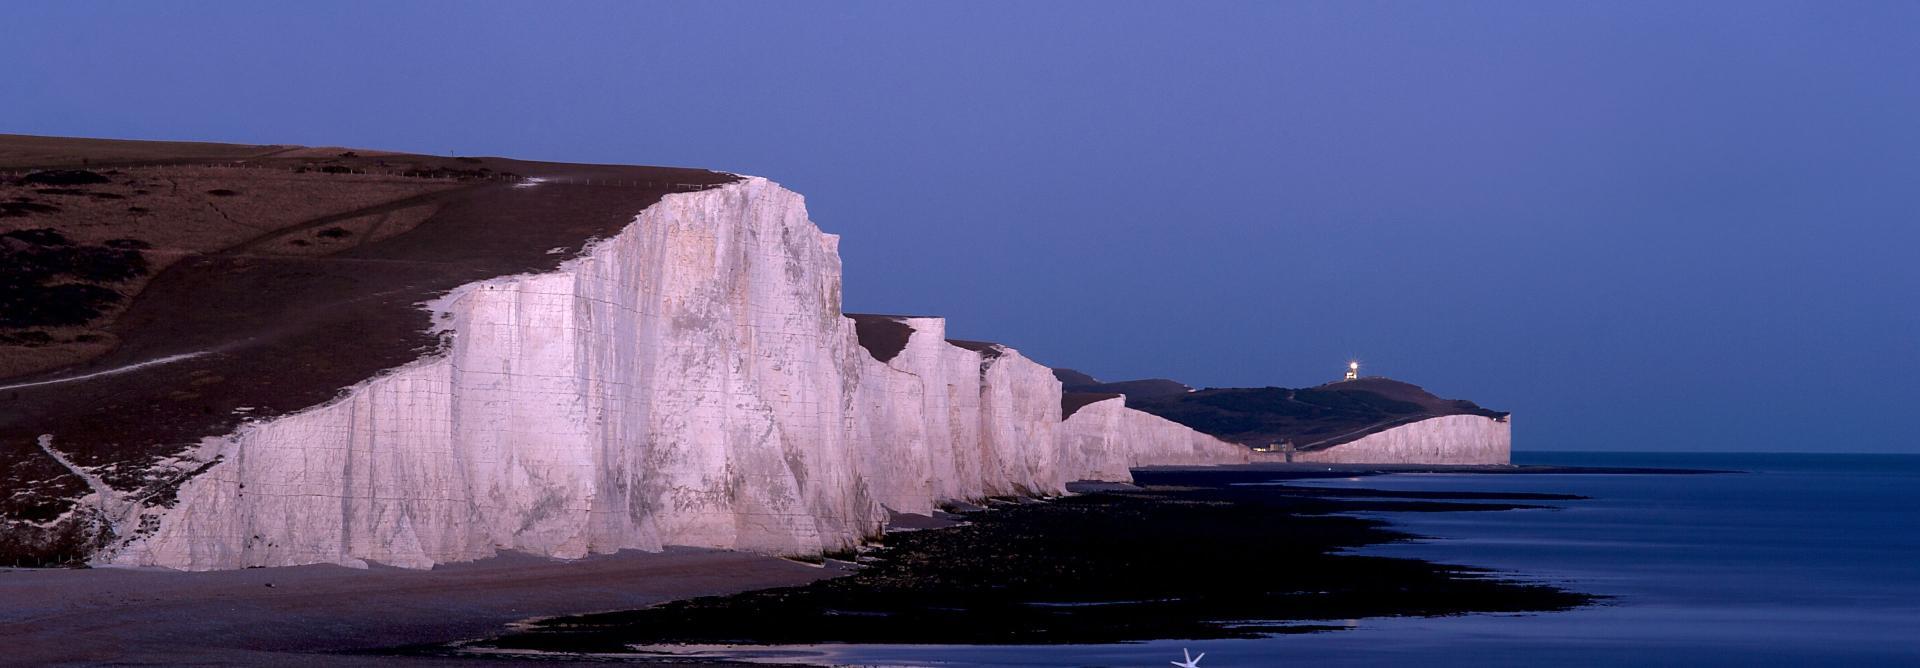 View of the white chalk cliffs of the Seven Sisters in the South Downs National Park at dawn.